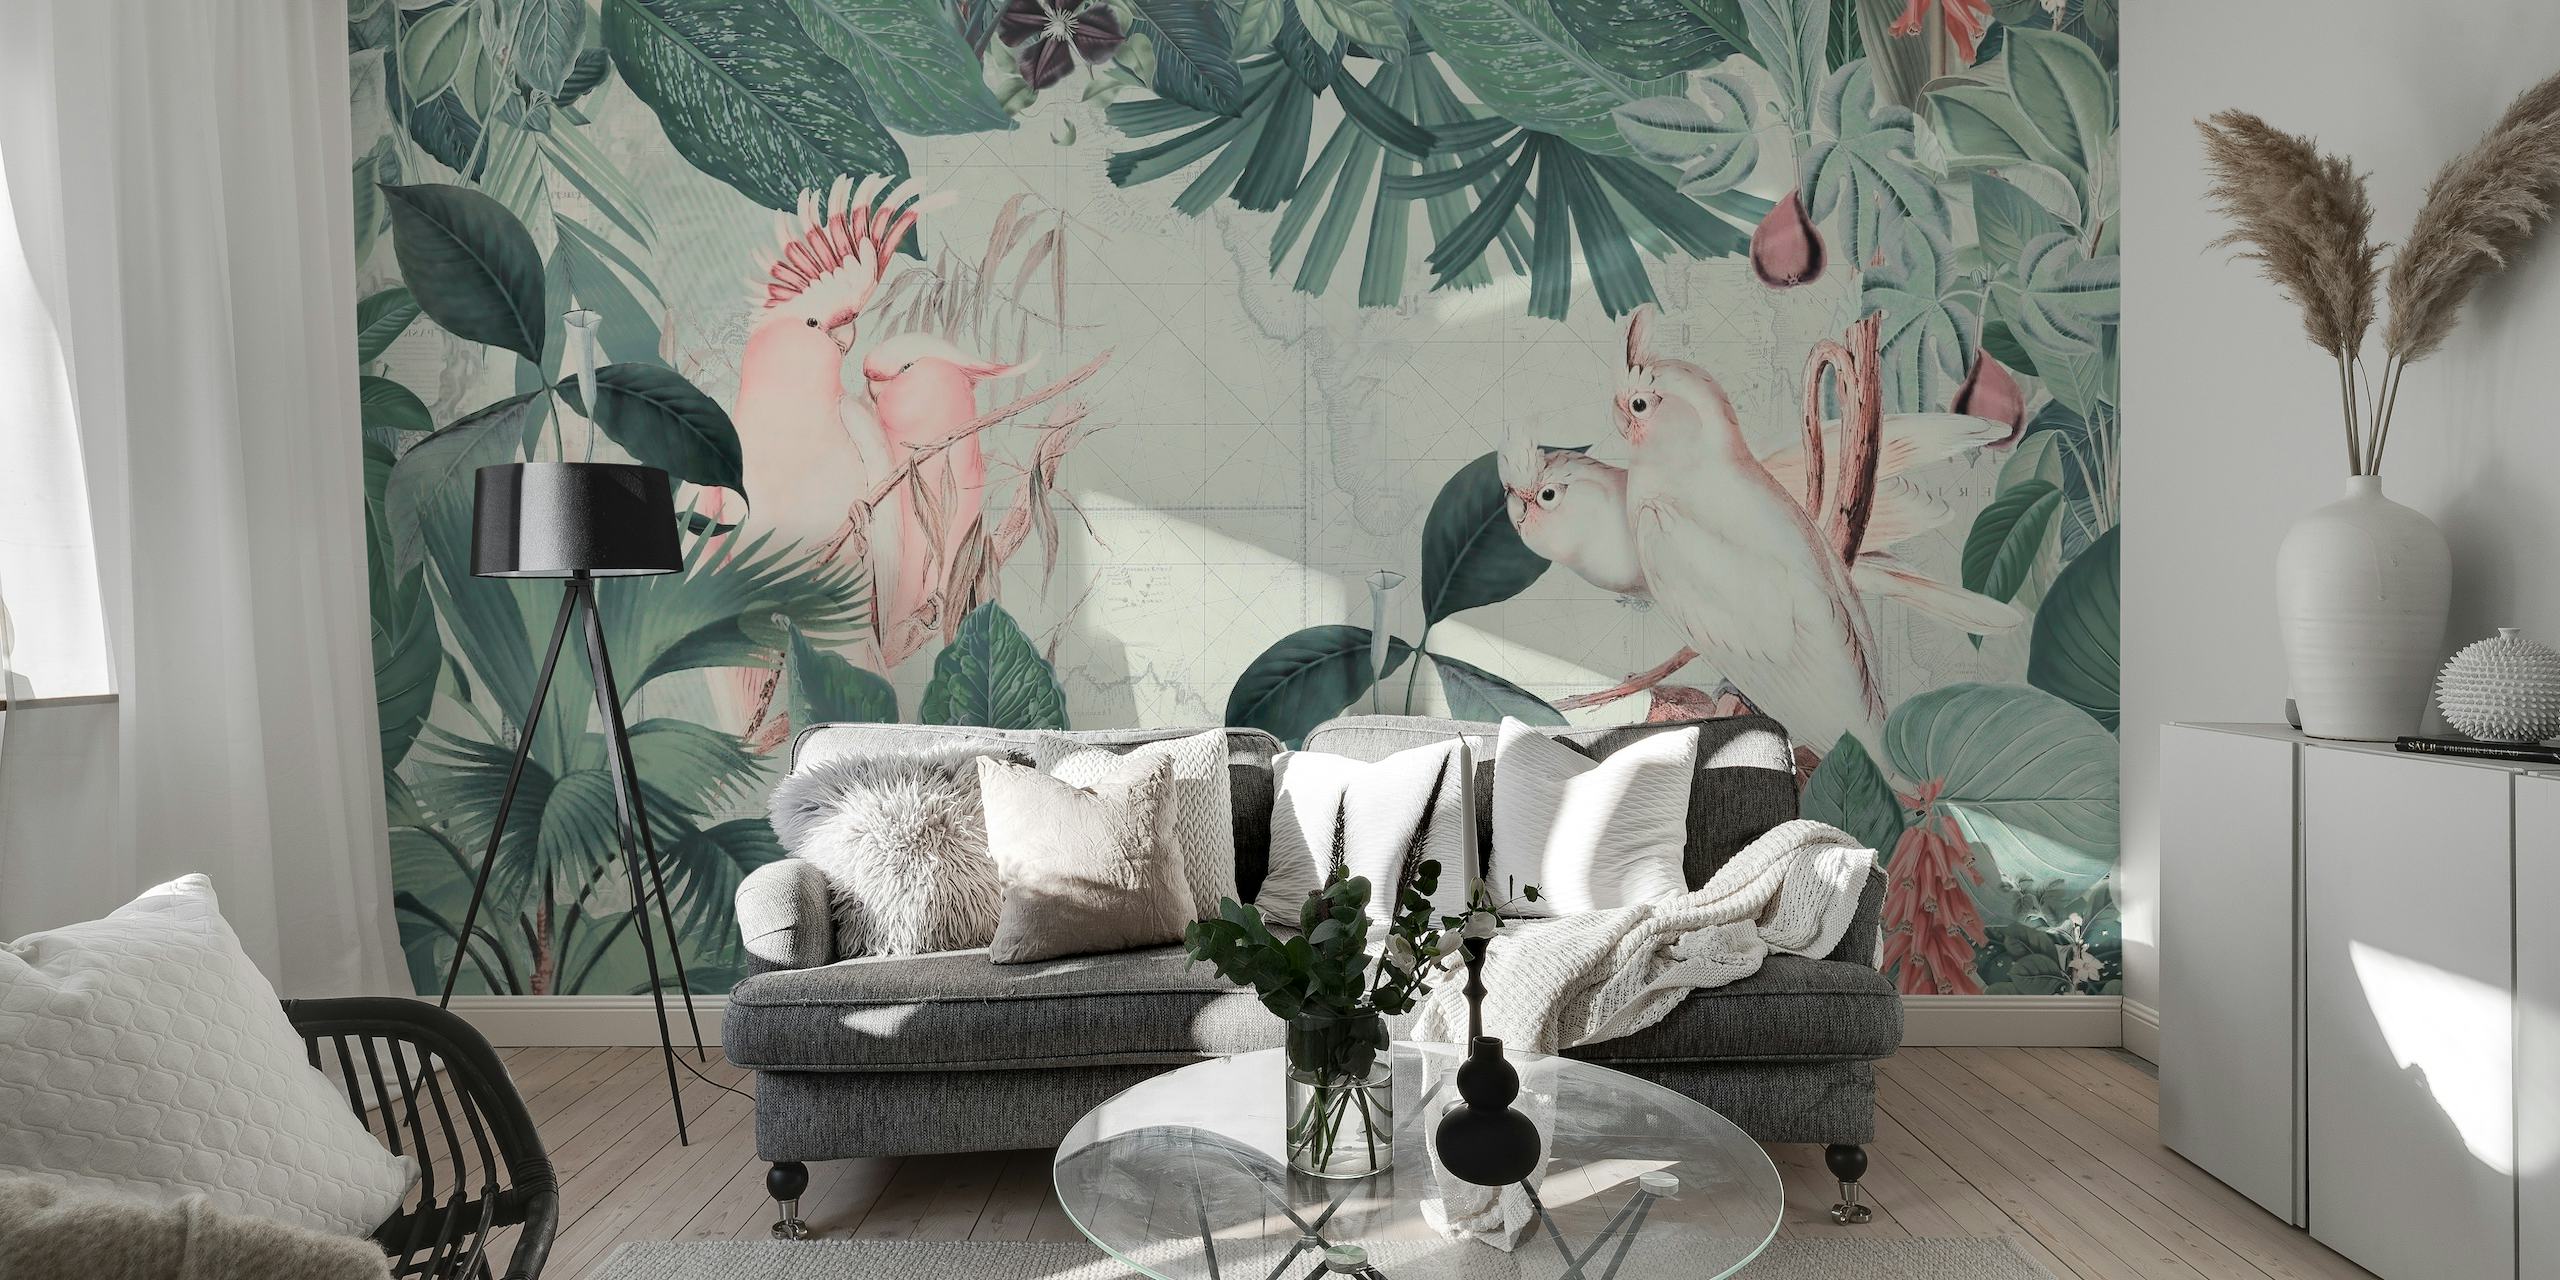 Vintage-style wall mural with cockatoos and tropical foliage in pastel colors